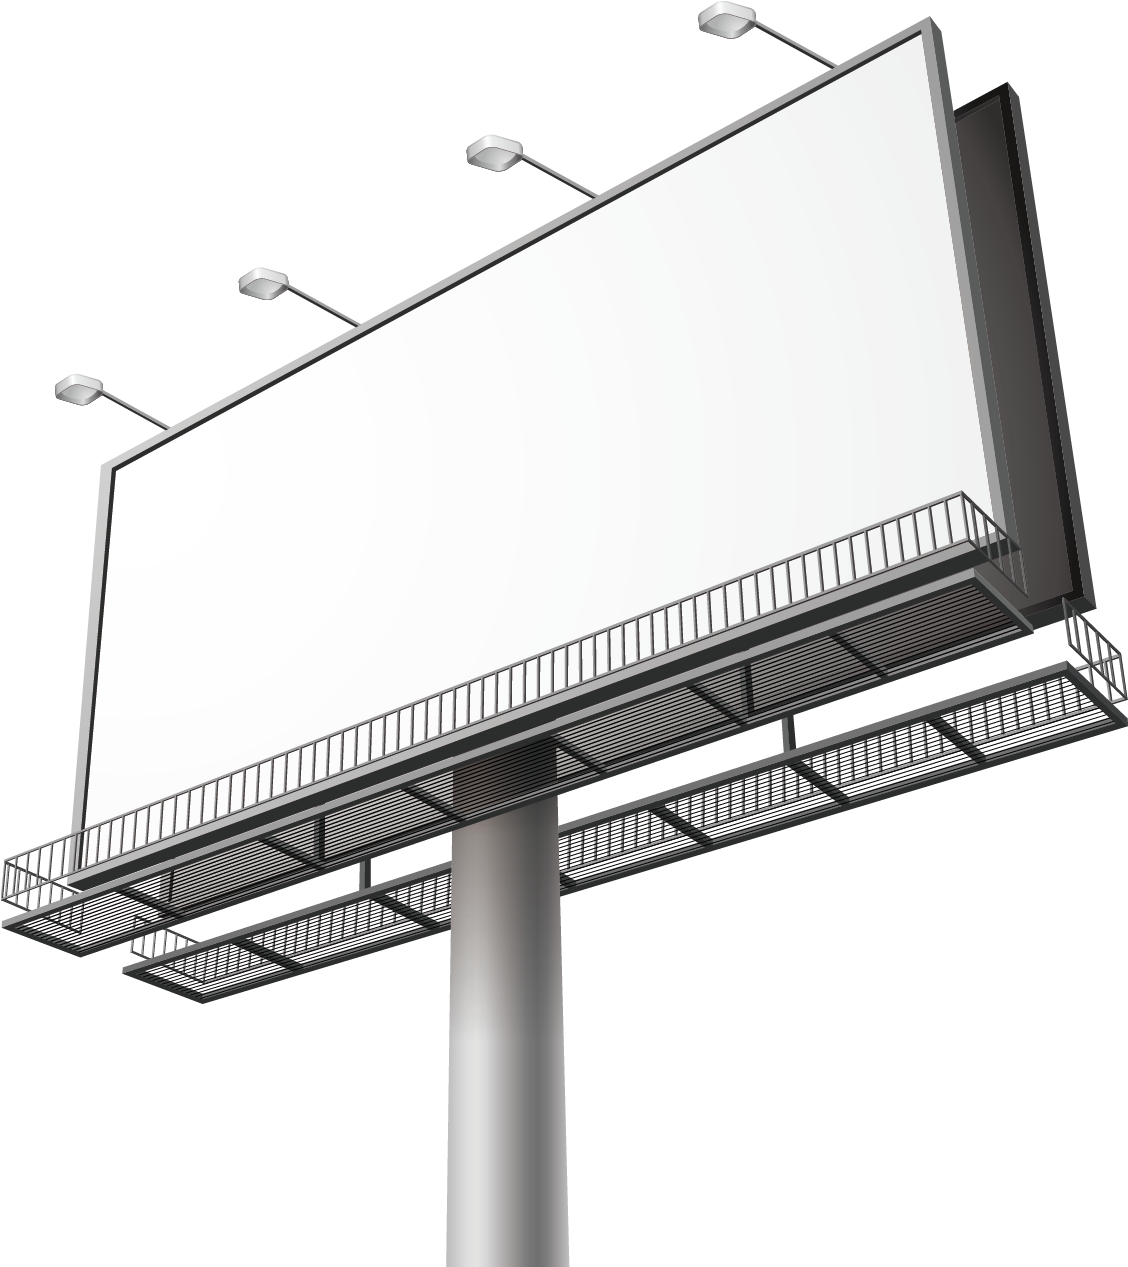 A Large White Billboard With Lights